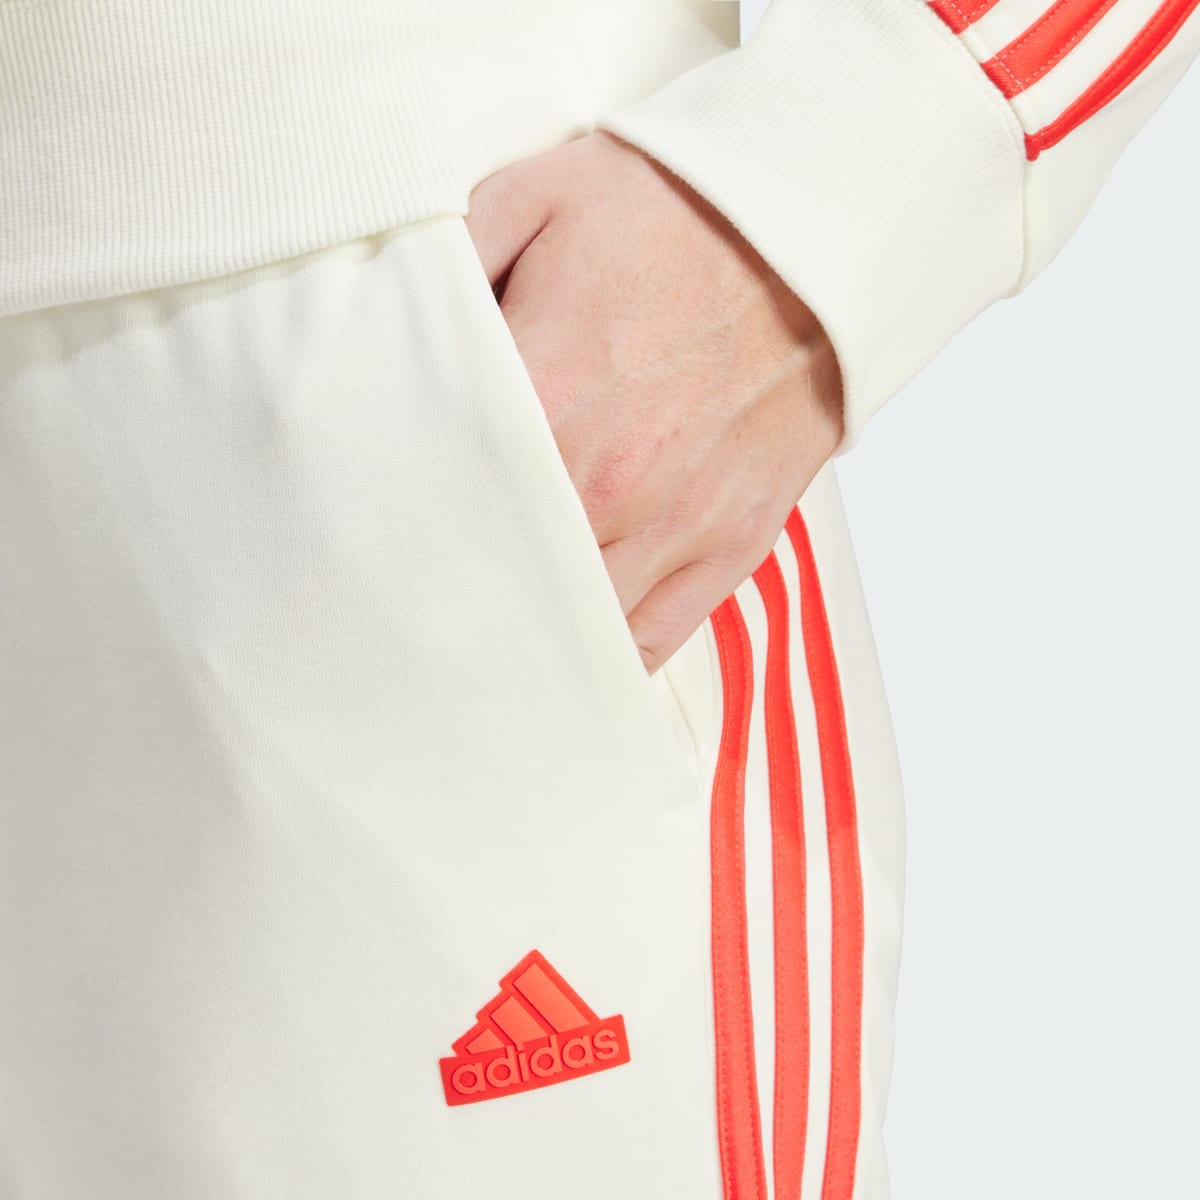 Adidas Iconic Wrapping 3-Stripes Snap Track Pants. 5